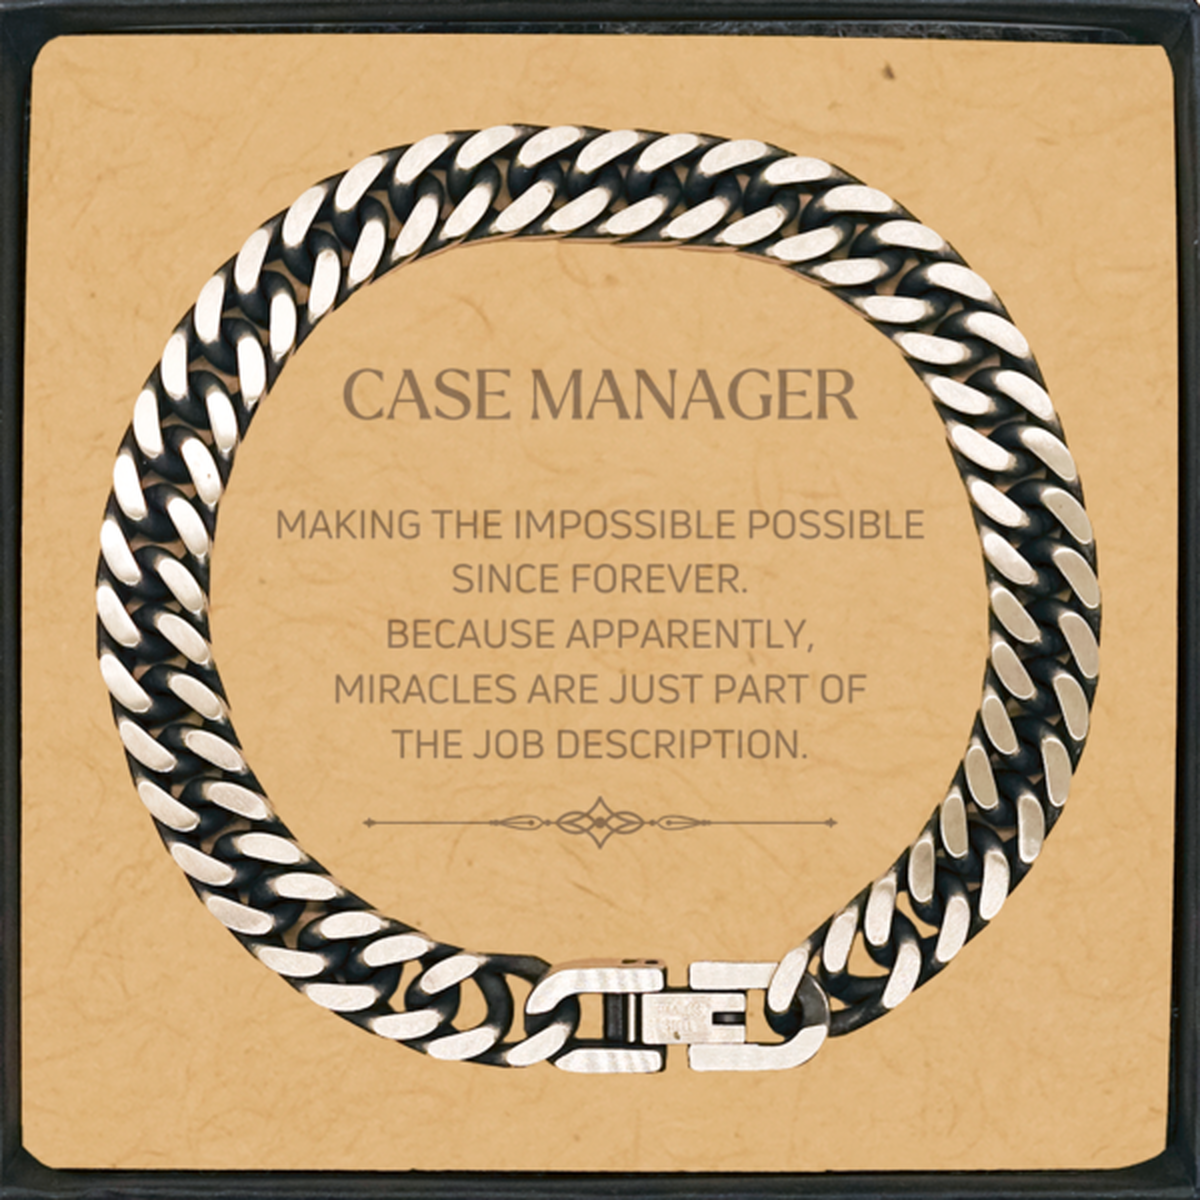 Funny Case Manager Gifts, Miracles are just part of the job description, Inspirational Birthday Cuban Link Chain Bracelet For Case Manager, Men, Women, Coworkers, Friends, Boss